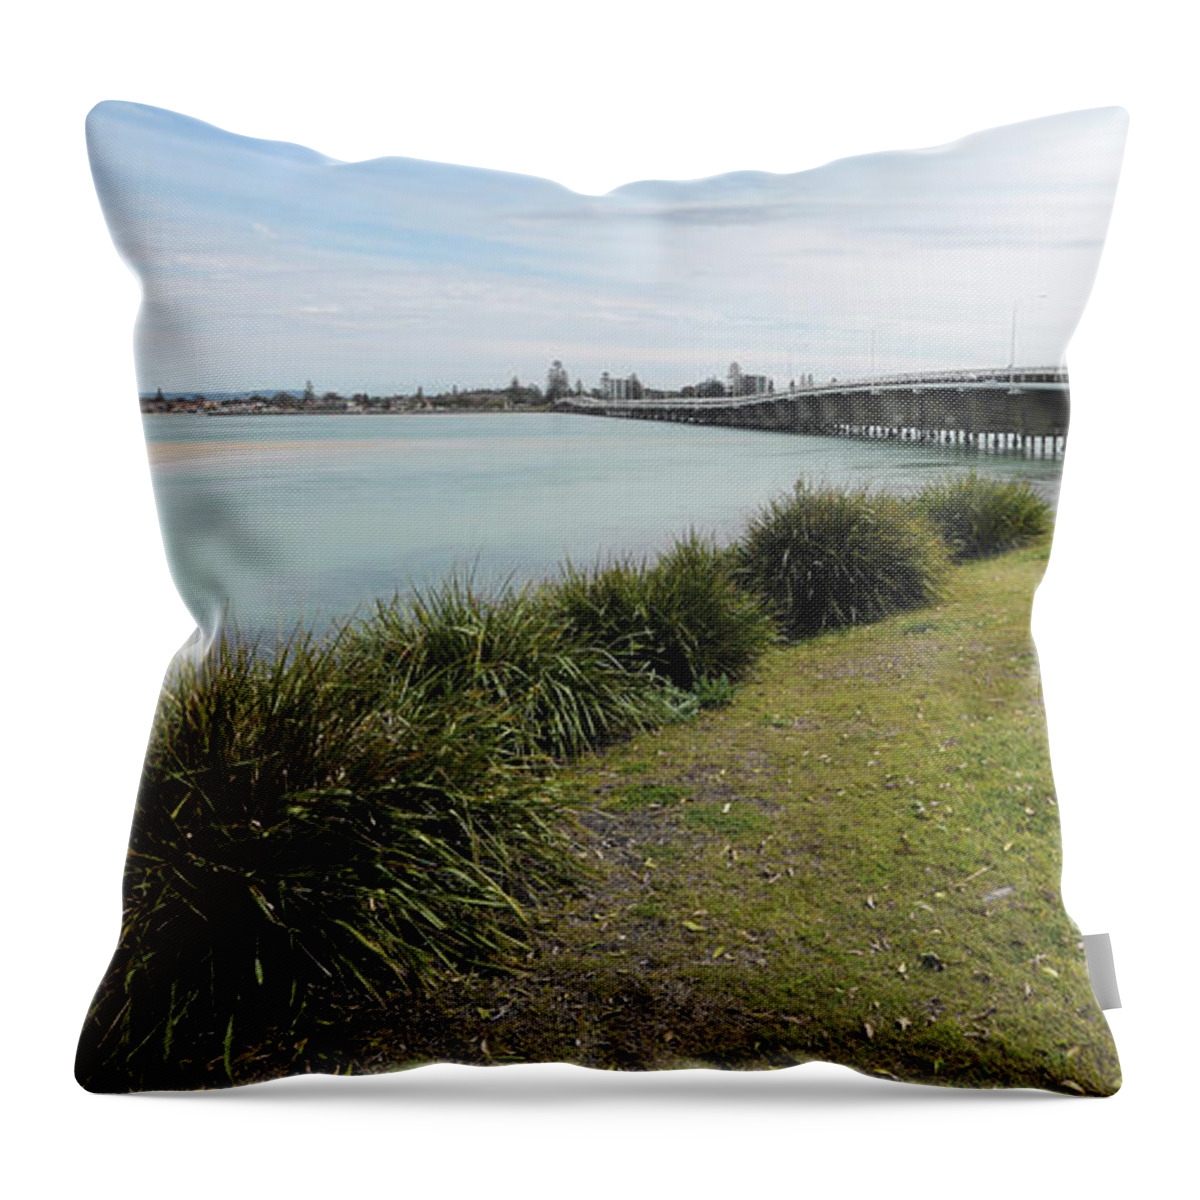 Forster Nsw Australia Throw Pillow featuring the digital art Beautiful Forster 665544 by Kevin Chippindall